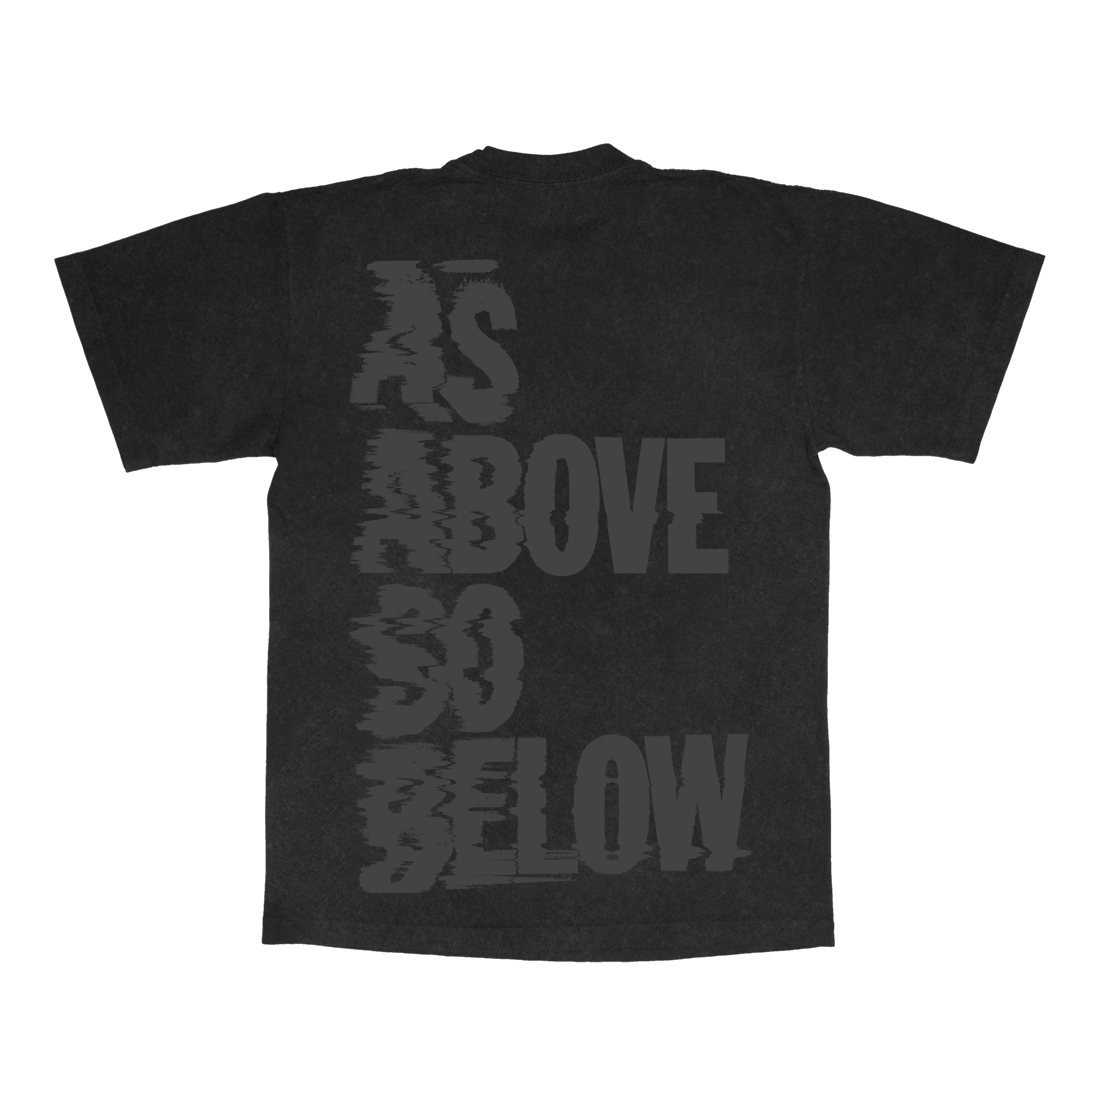 Highly Suspect - As Above, So Below Cover Tee